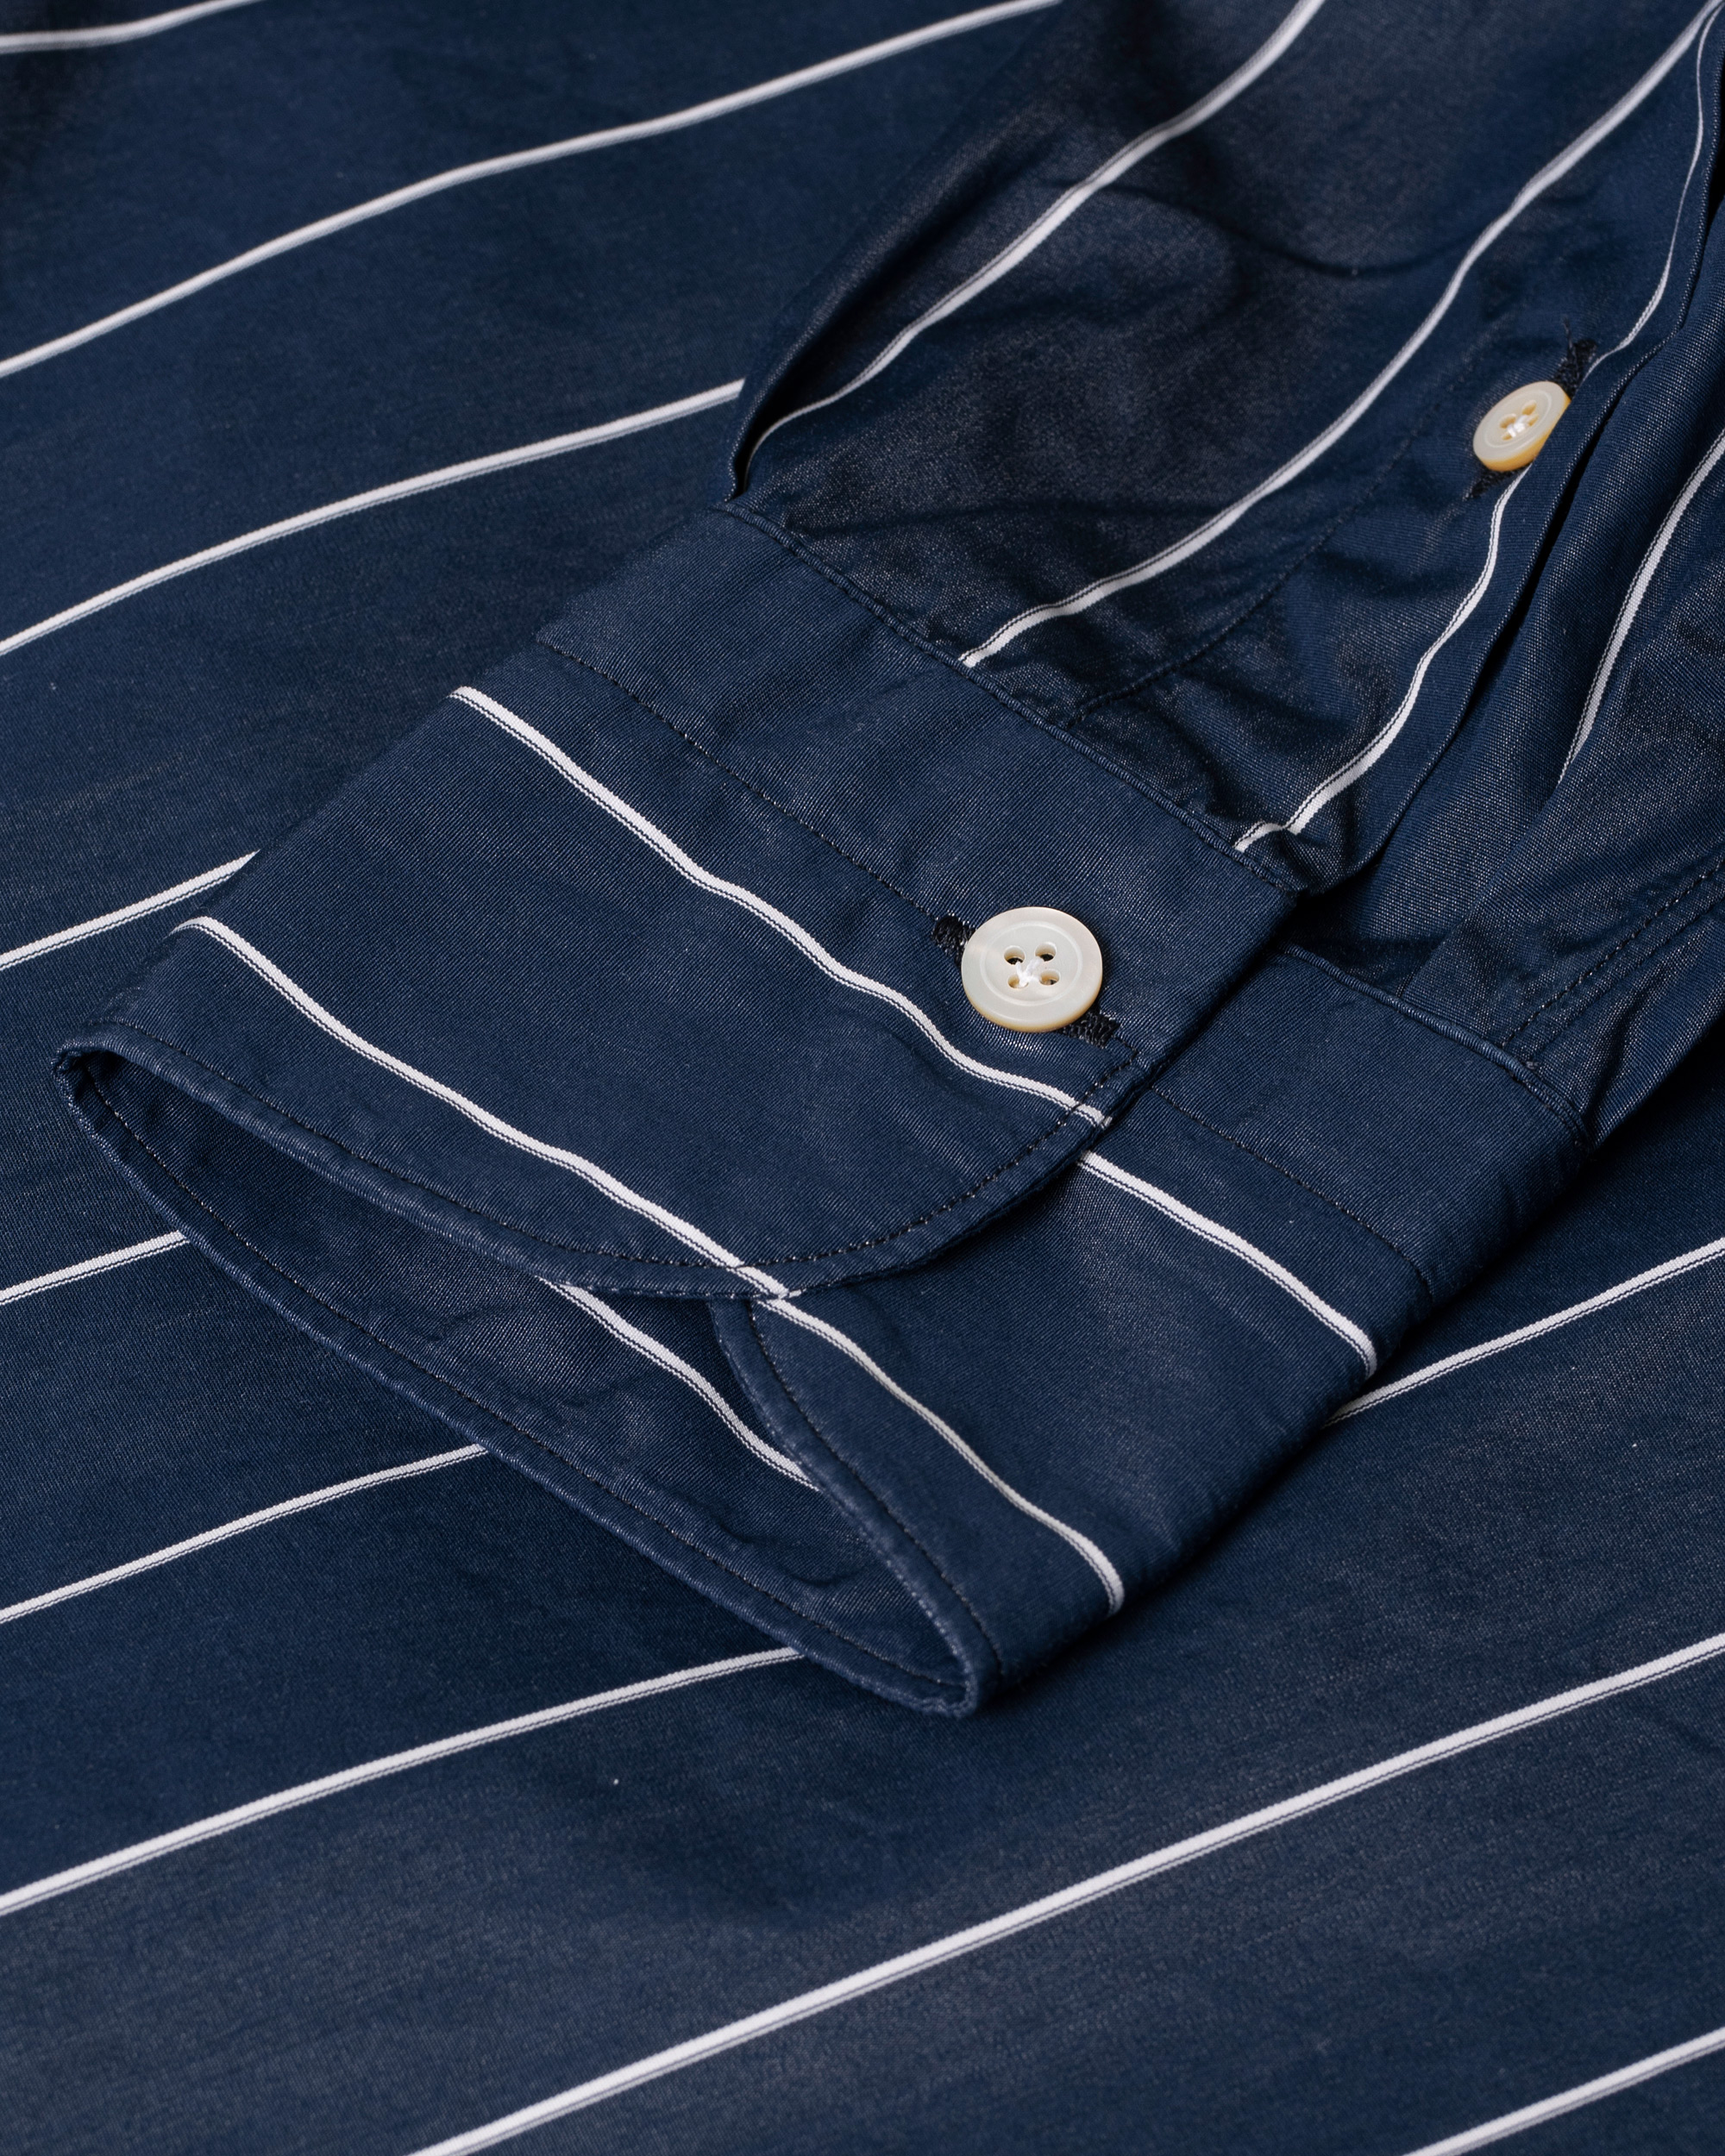 Herr | Care of Carl Pre-owned | Pre-owned | Finamore Napoli Tokyo Vintage Cotton Shirt Navy 39 - M